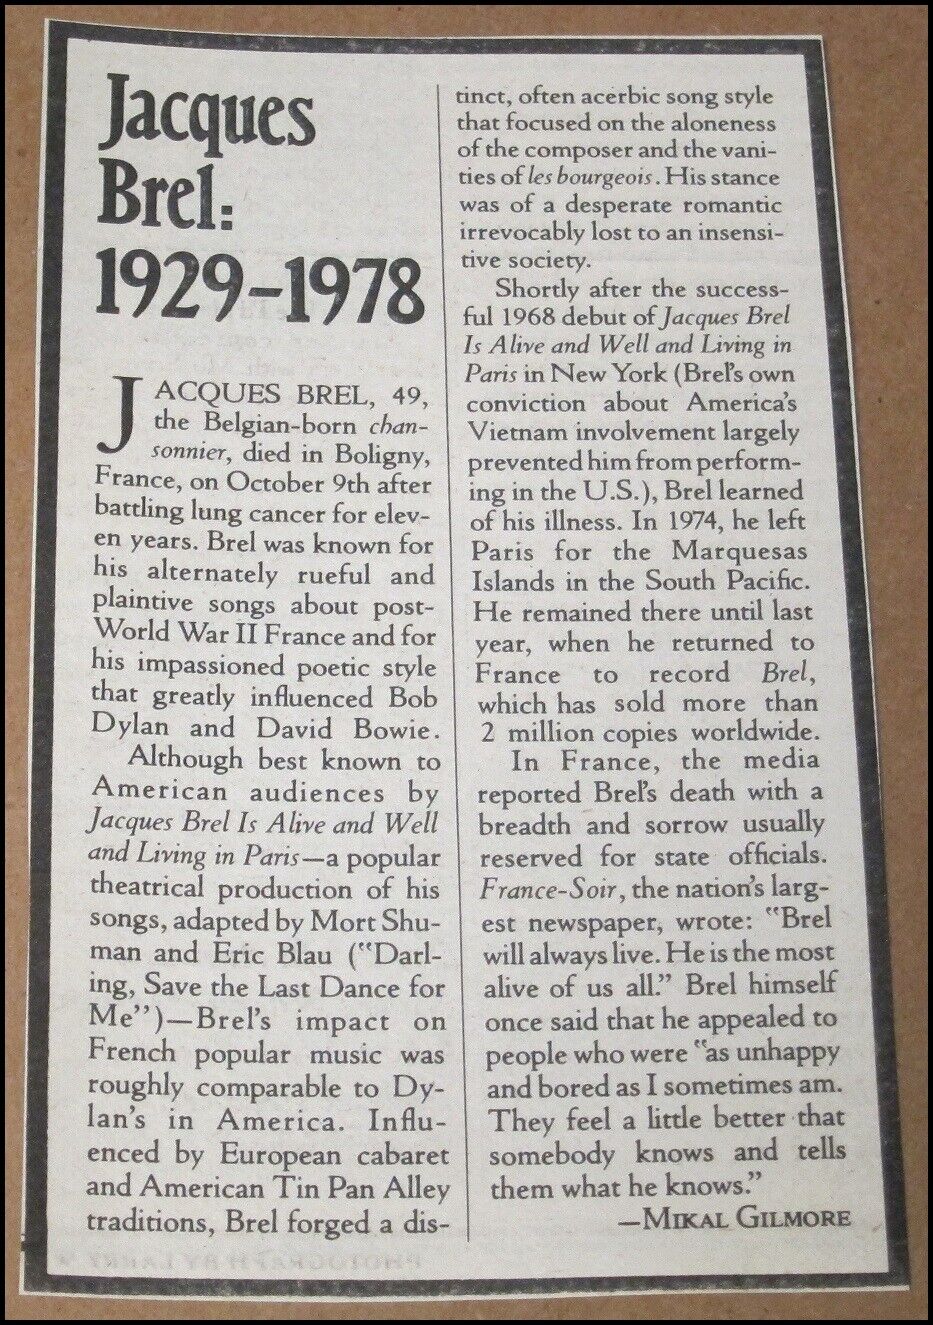 1978 Death of Jacques Brel Rolling Stone Newspaper Article Clipping 1929 - 1978